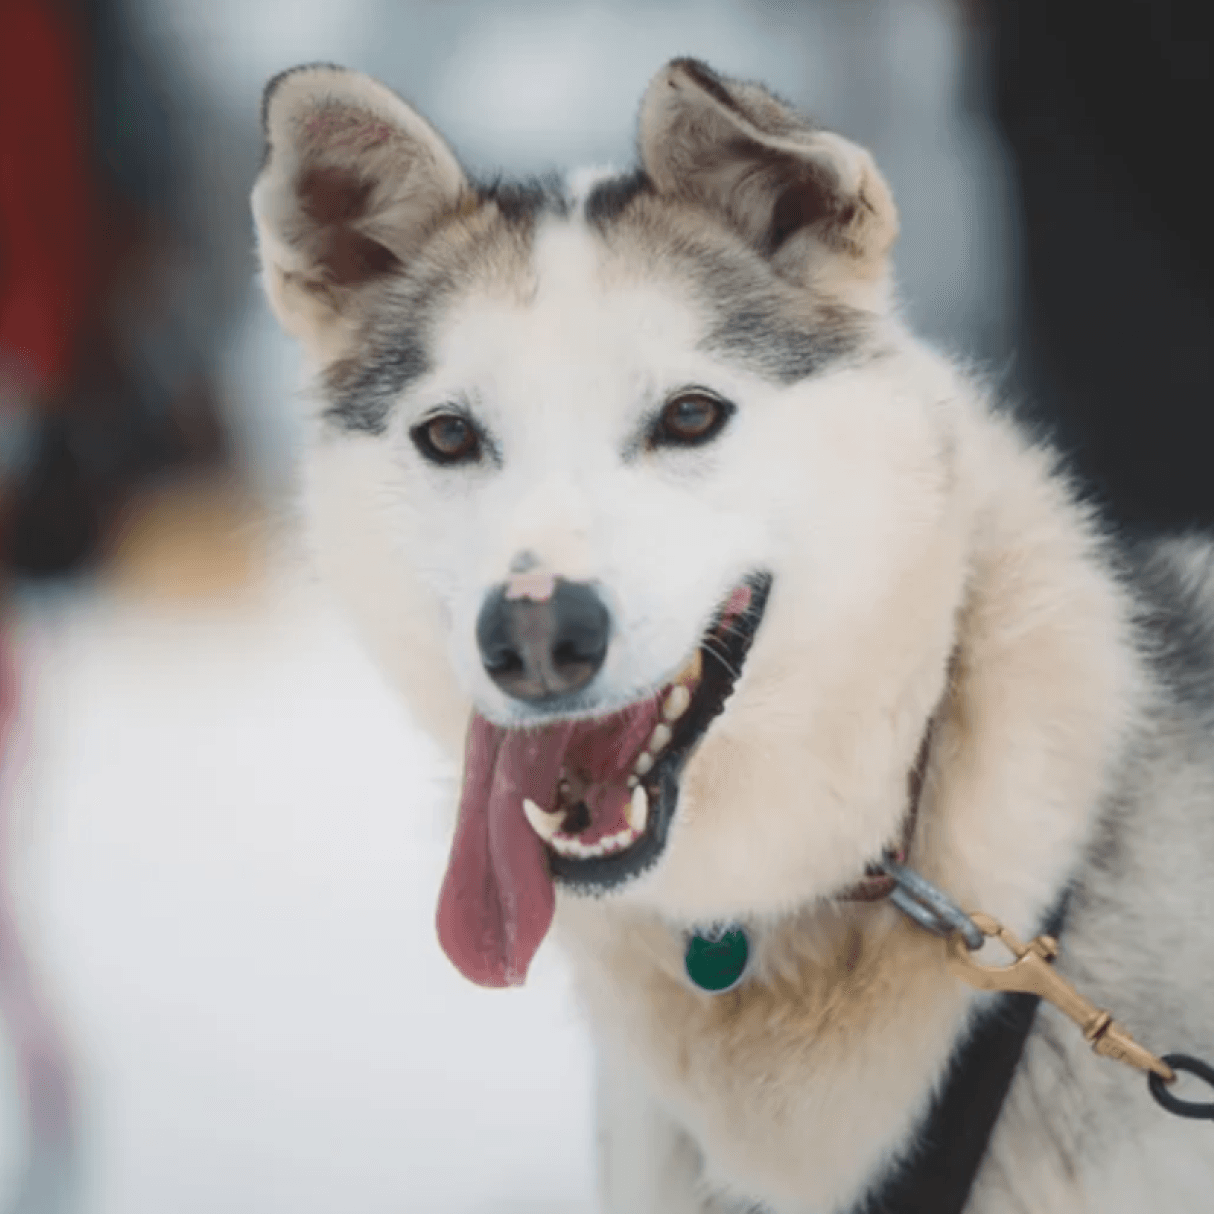 A husky sled-dog smile at the camera with its tongue hanging out.